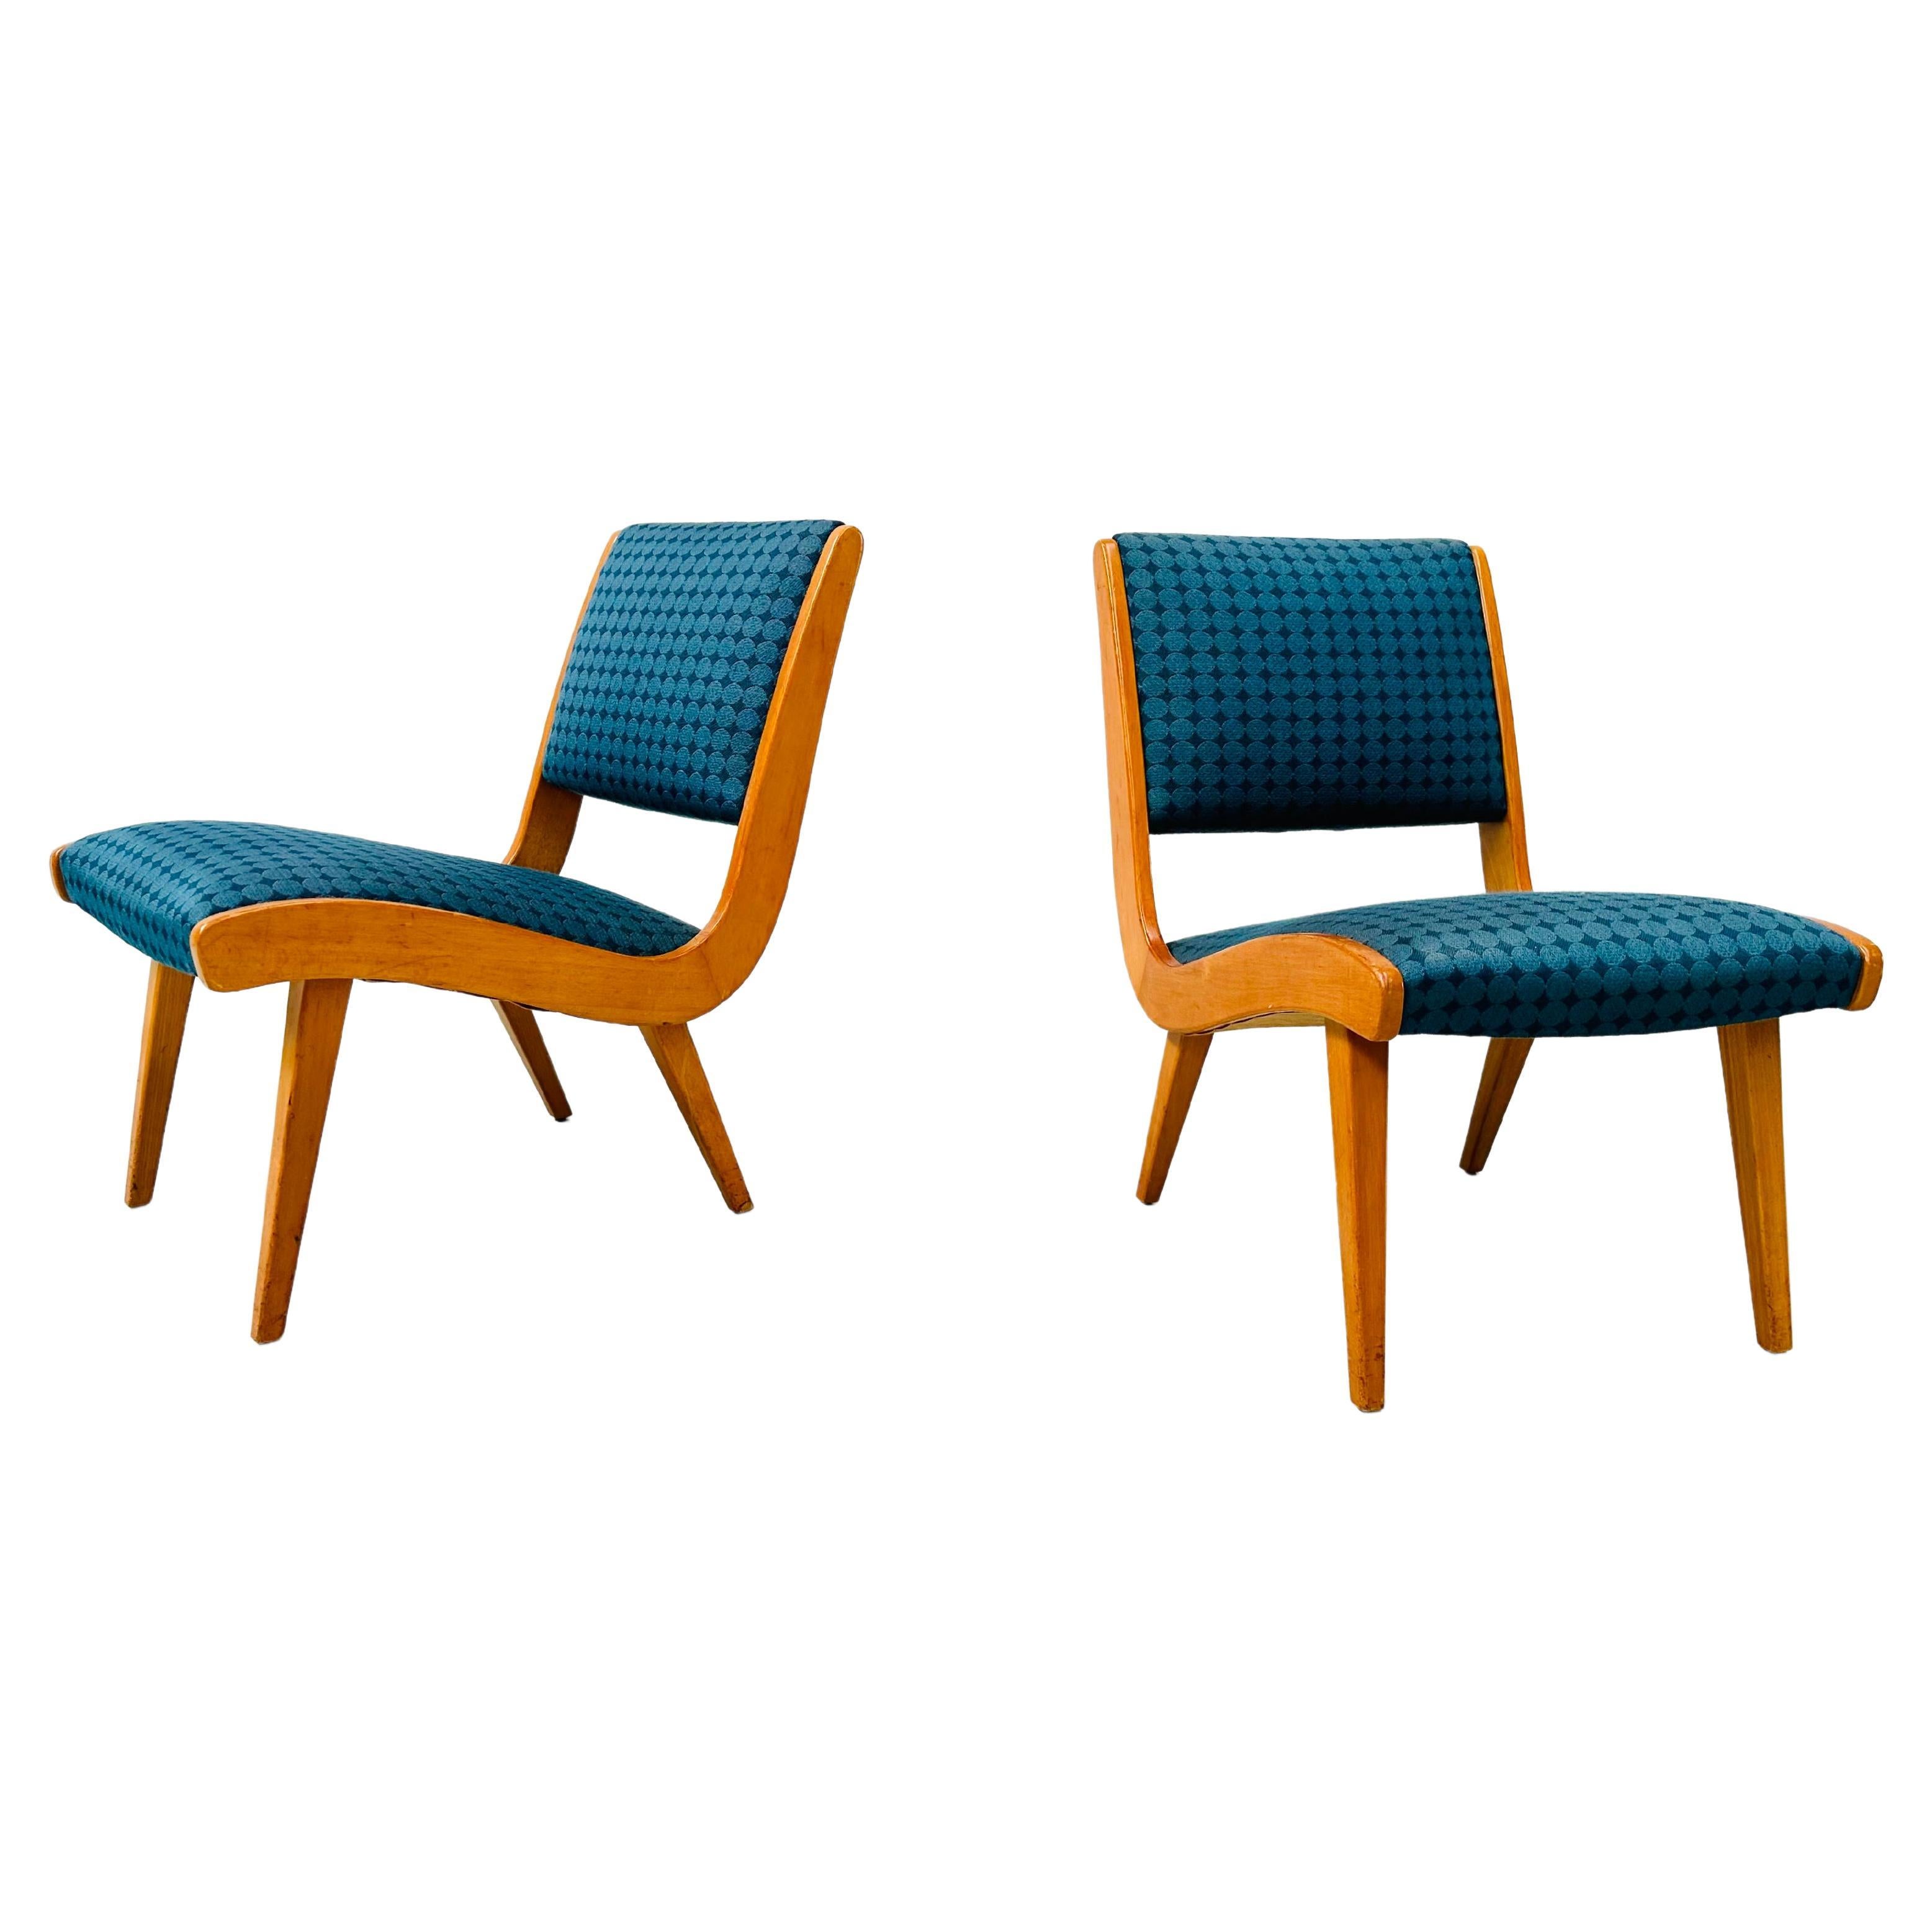 1950s Rare Set Vostra Chairs Numbered & Original Fabric by Jens Risom for Knoll.